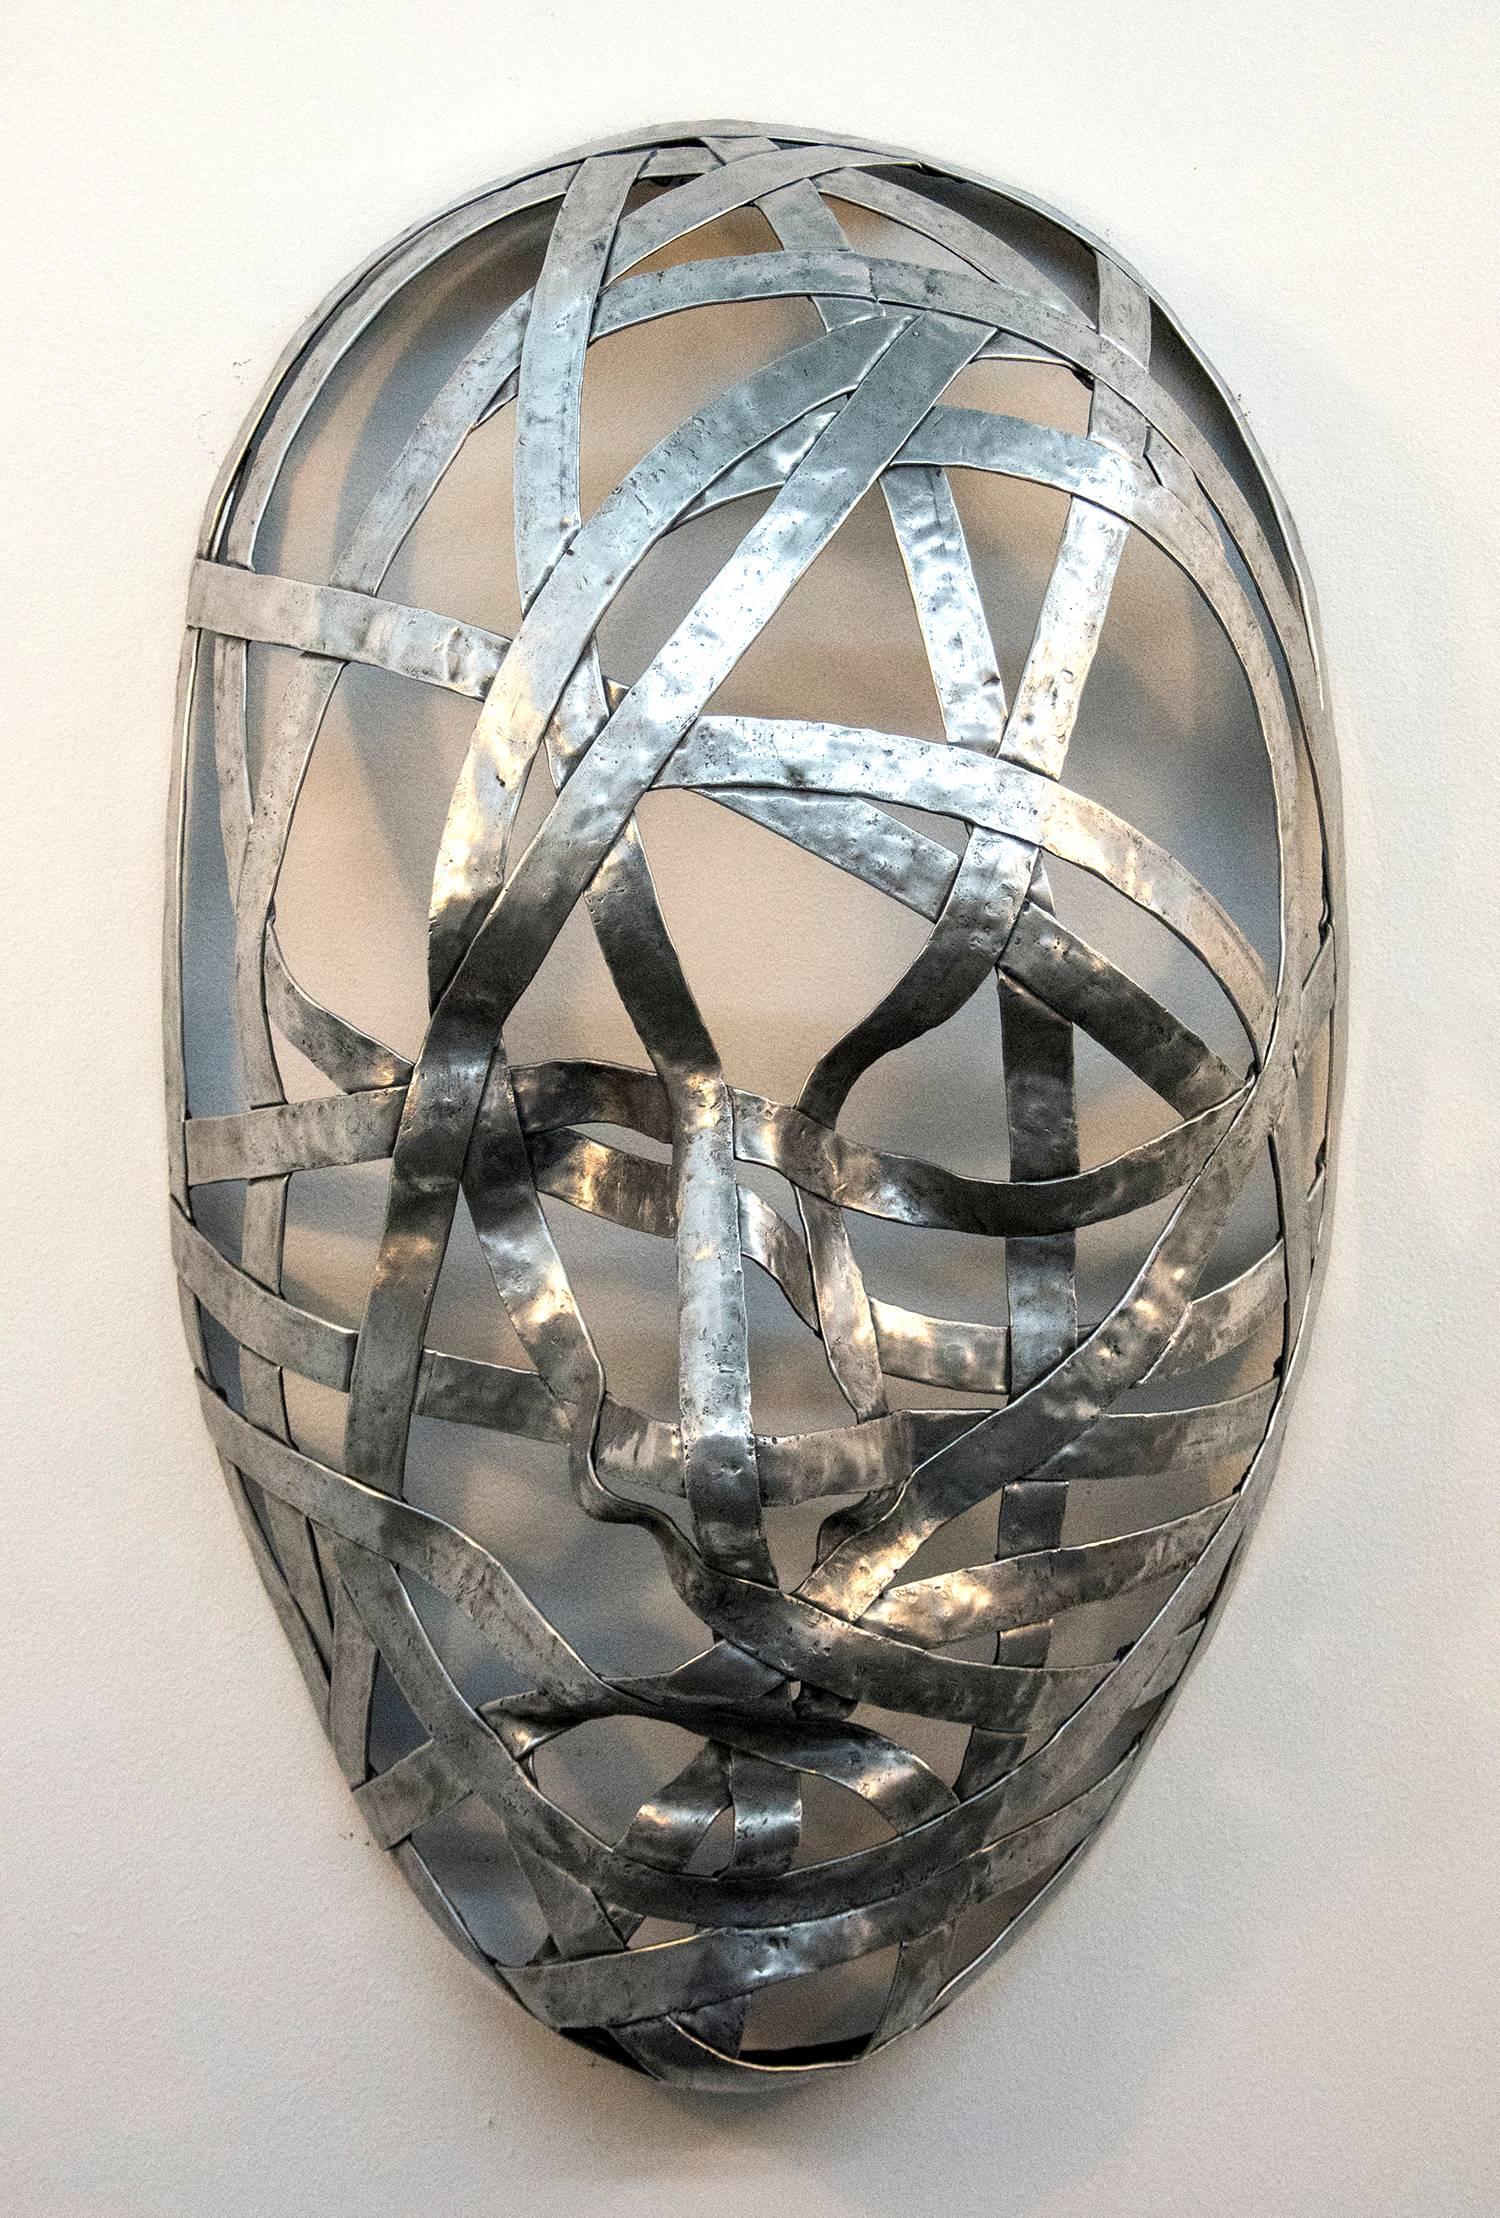 Narrow strips of aluminum are skillfully shaped into the curves and folds of three masks by sculptor Dale Dunning. The industrial steam-punk inspired wrapped faces that change from right to left also reflect a romantic sensibility recalling the